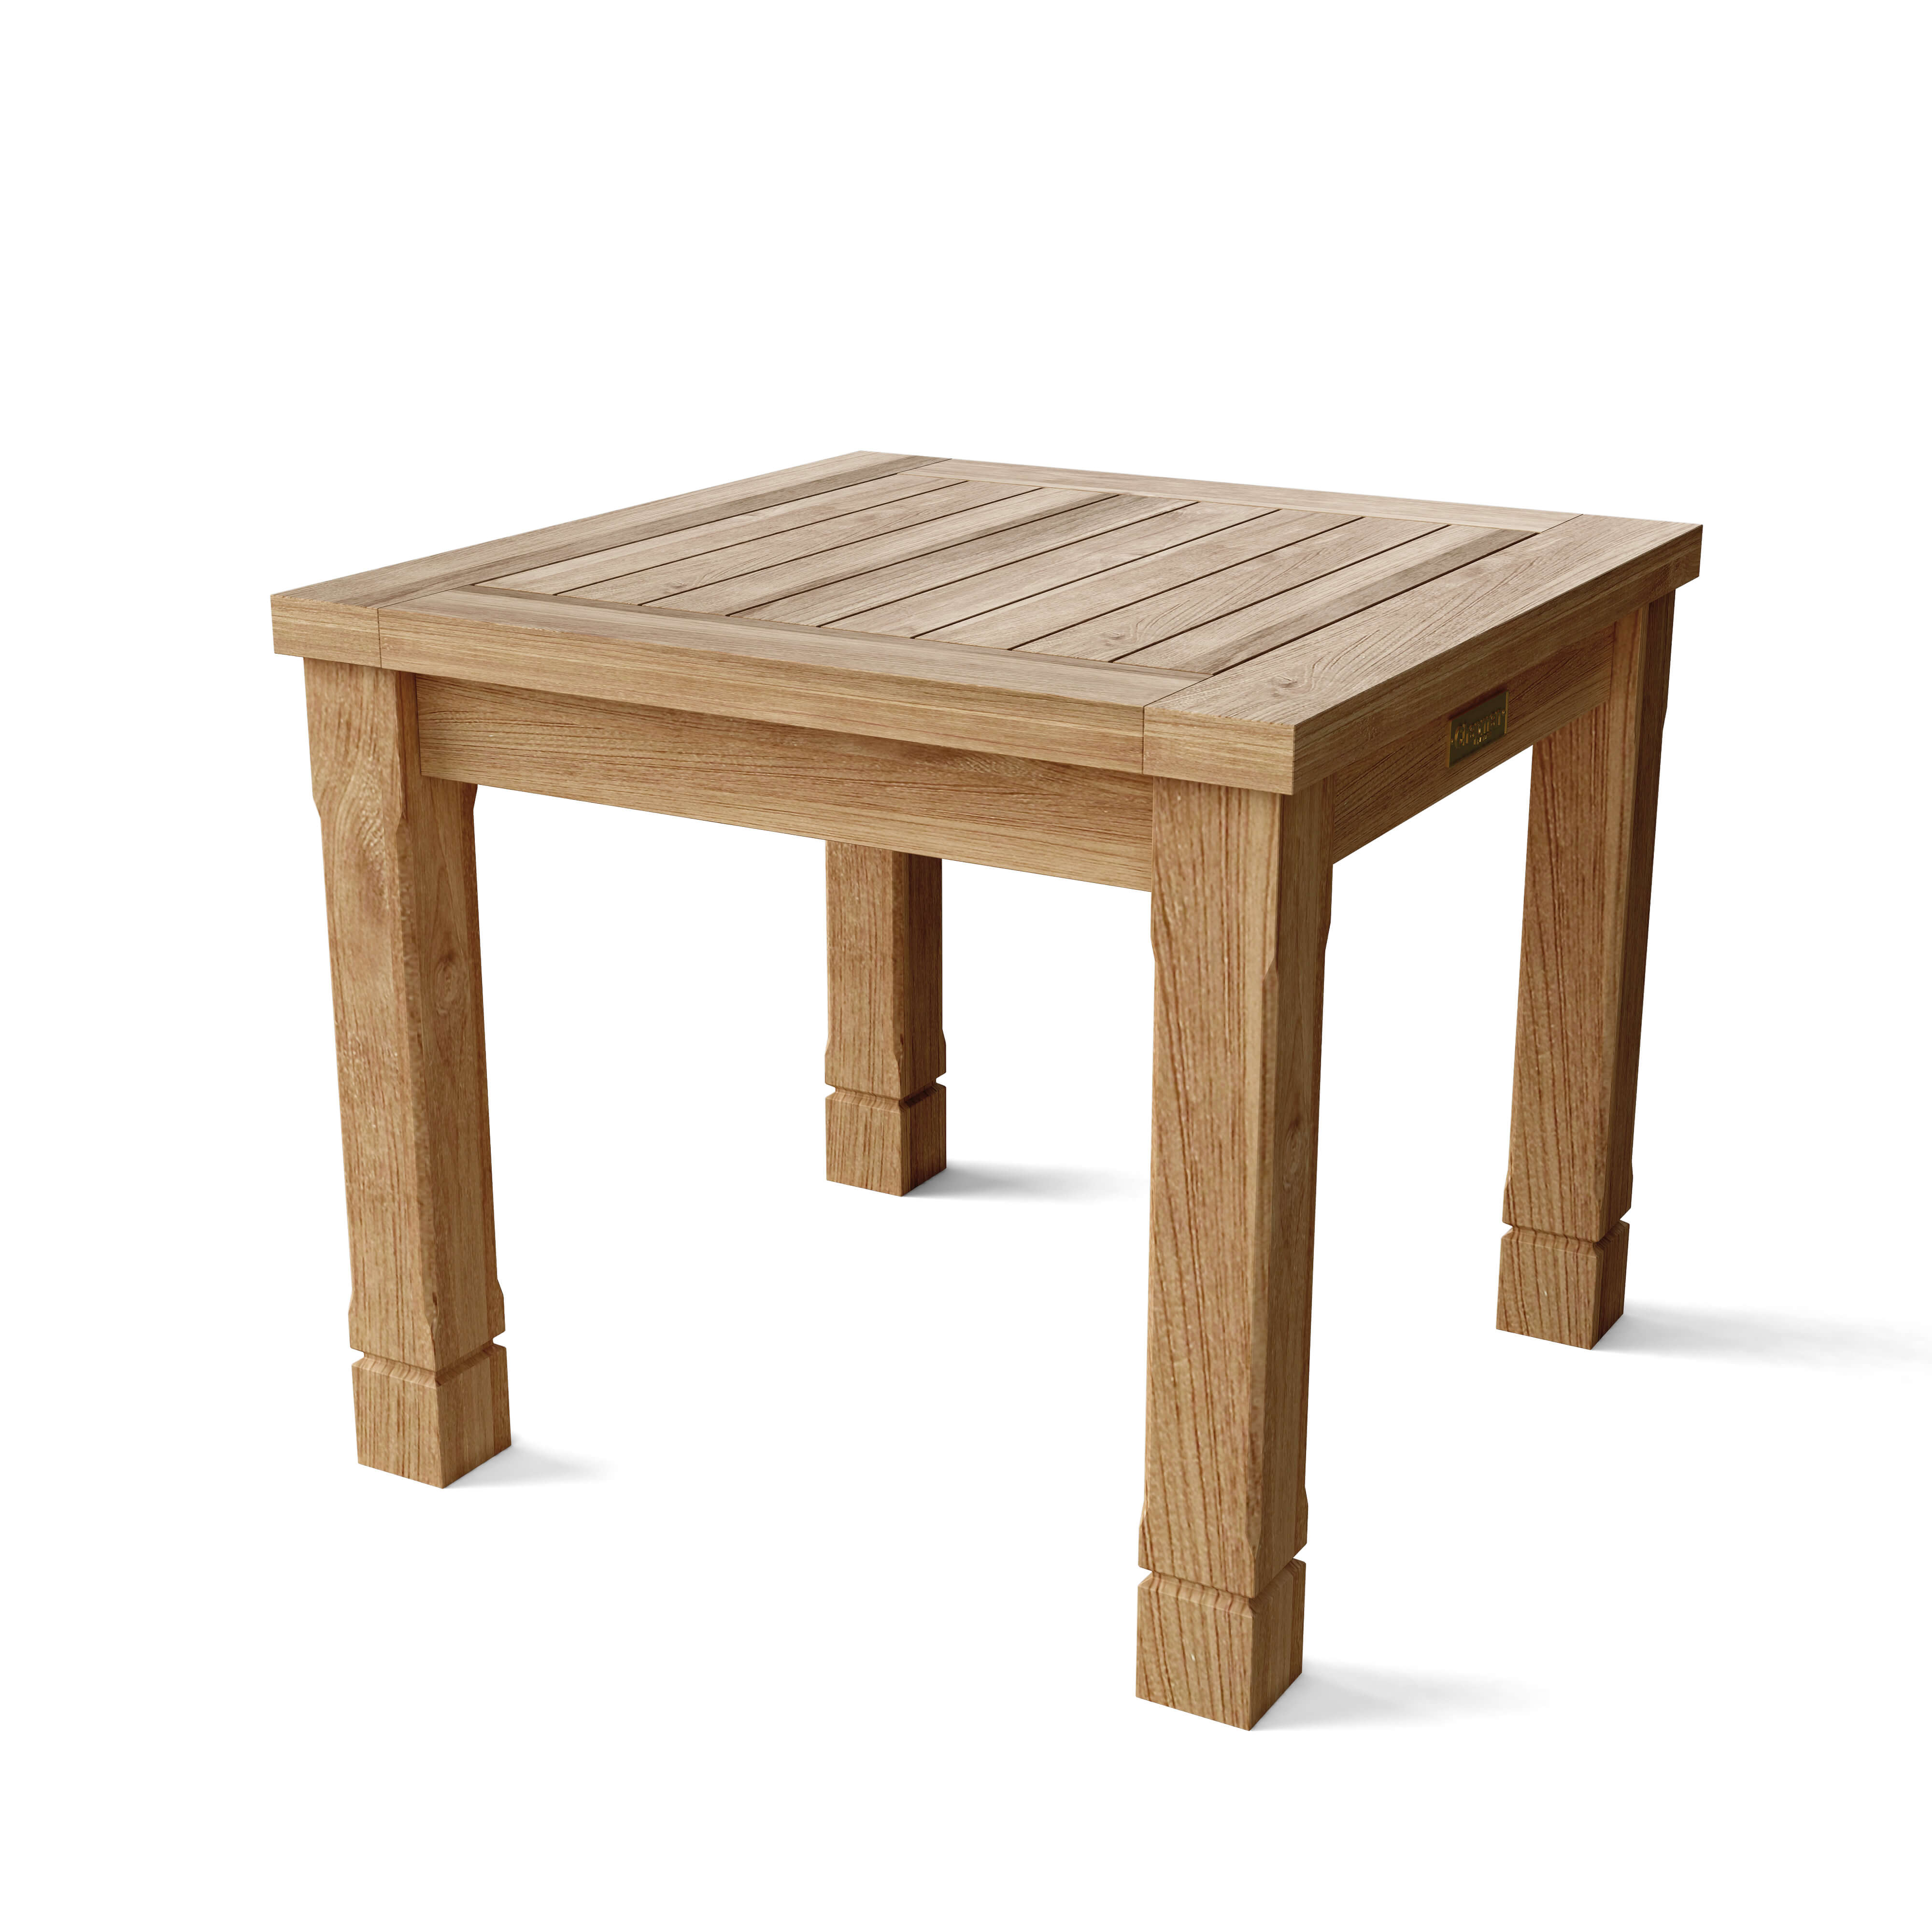 Anderson Teak SouthBay Square Side Table